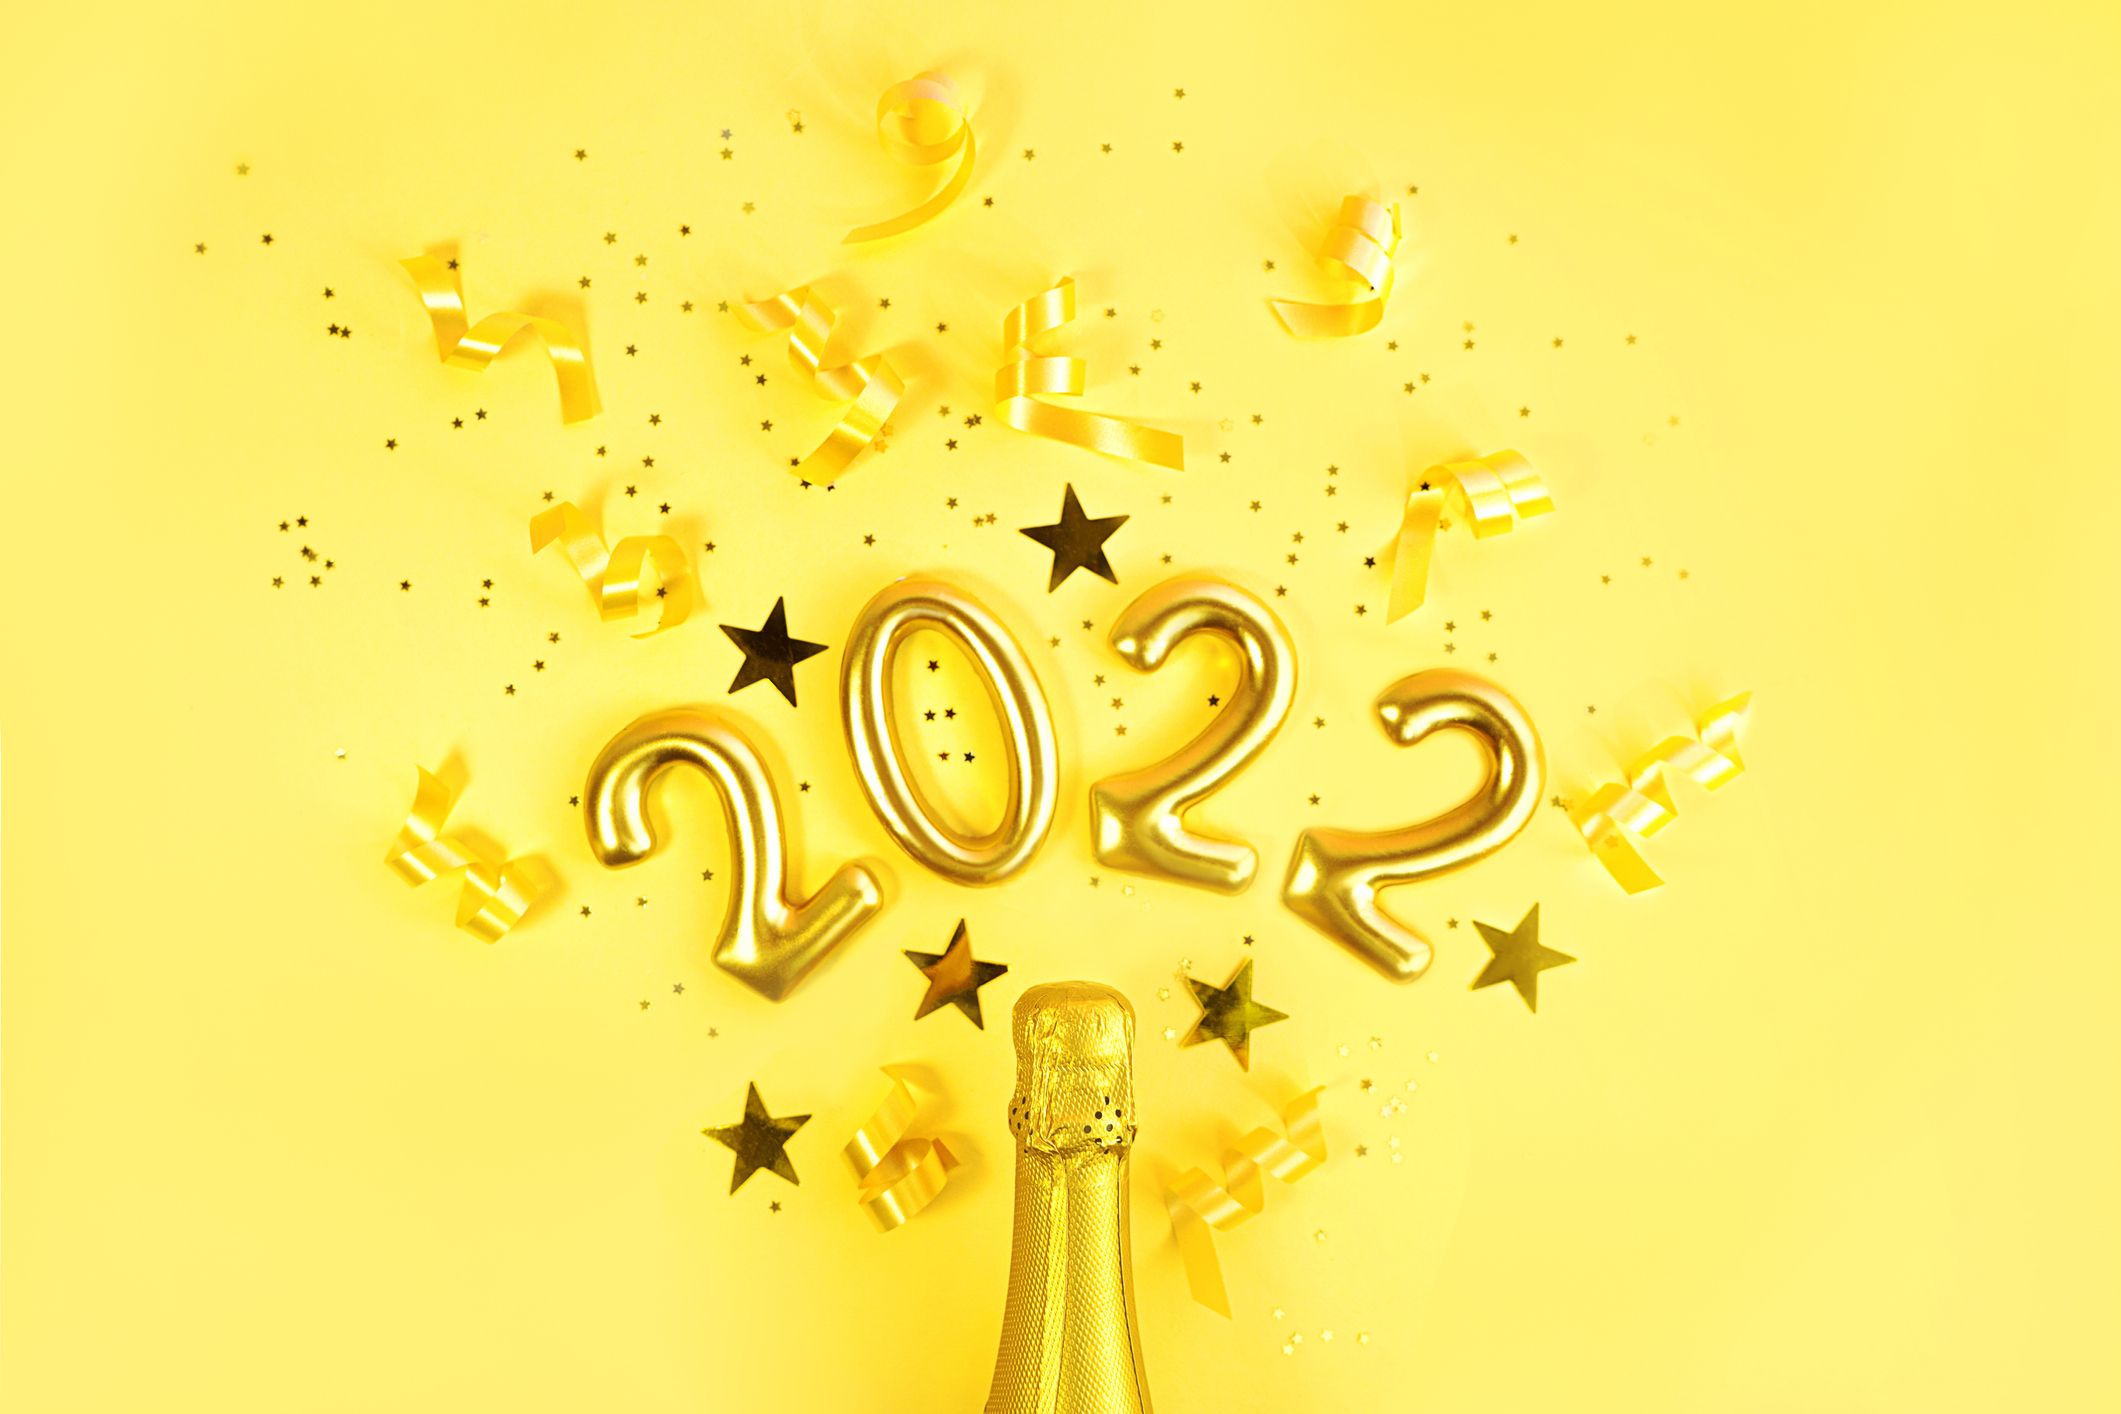 18 Fun Things to Do on New Year's Eve 2022 — Best New Year's Eve Activities